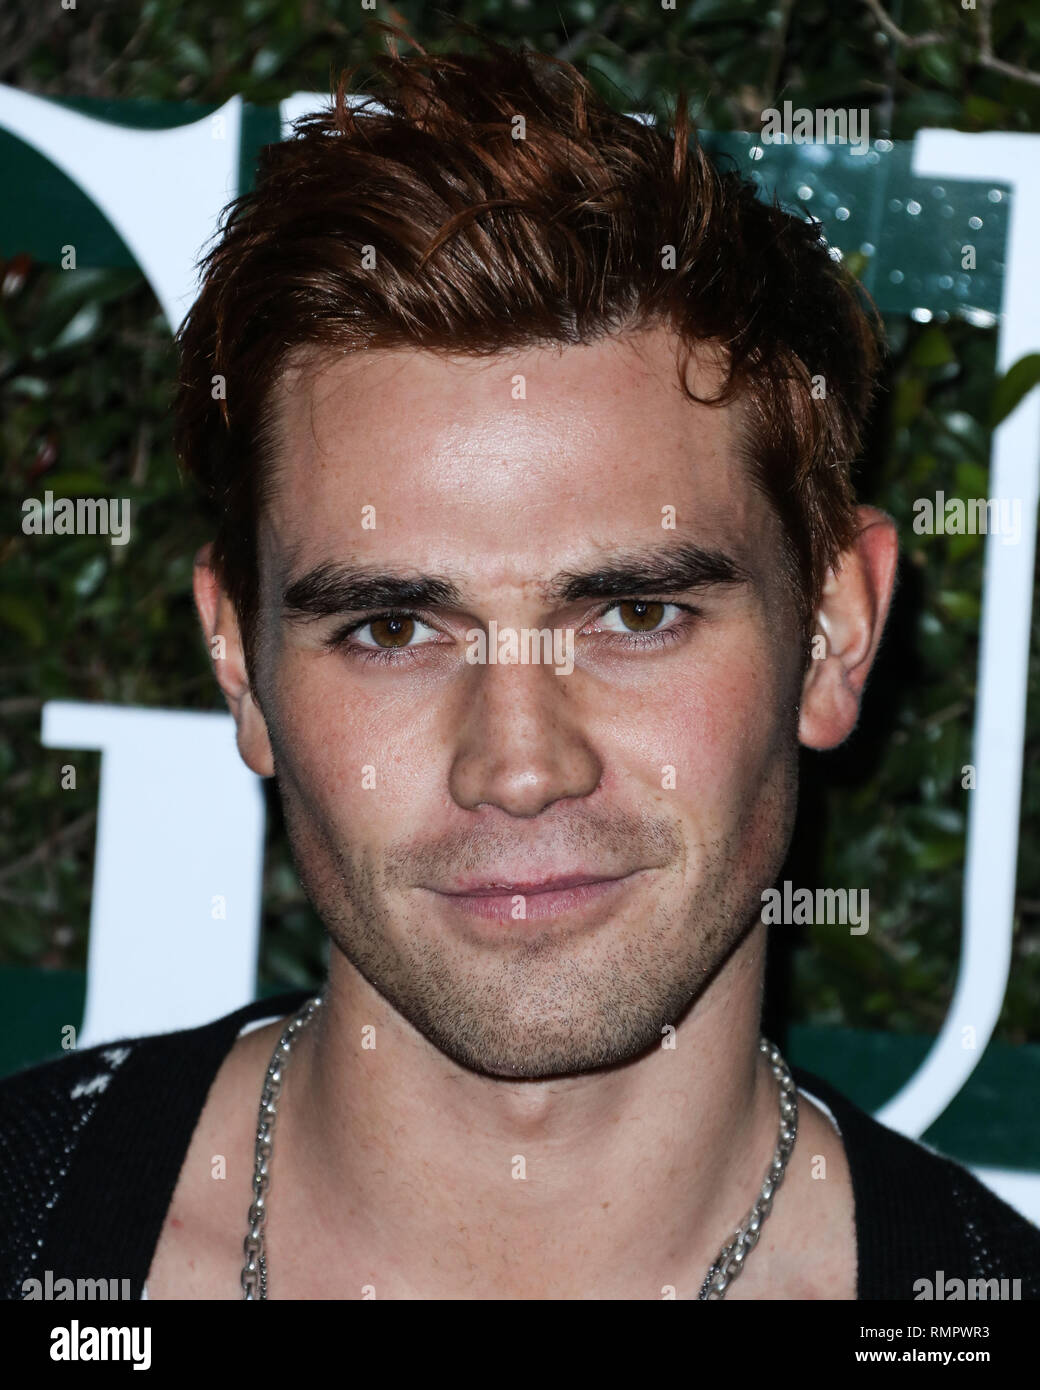 LOS ANGELES, CA, USA - FEBRUARY 15: Actor KJ Apa arrives at Teen Vogue's  2019 Young Hollywood Party Presented By Snap held at the Los Angeles  Theatre on February 15, 2019 in